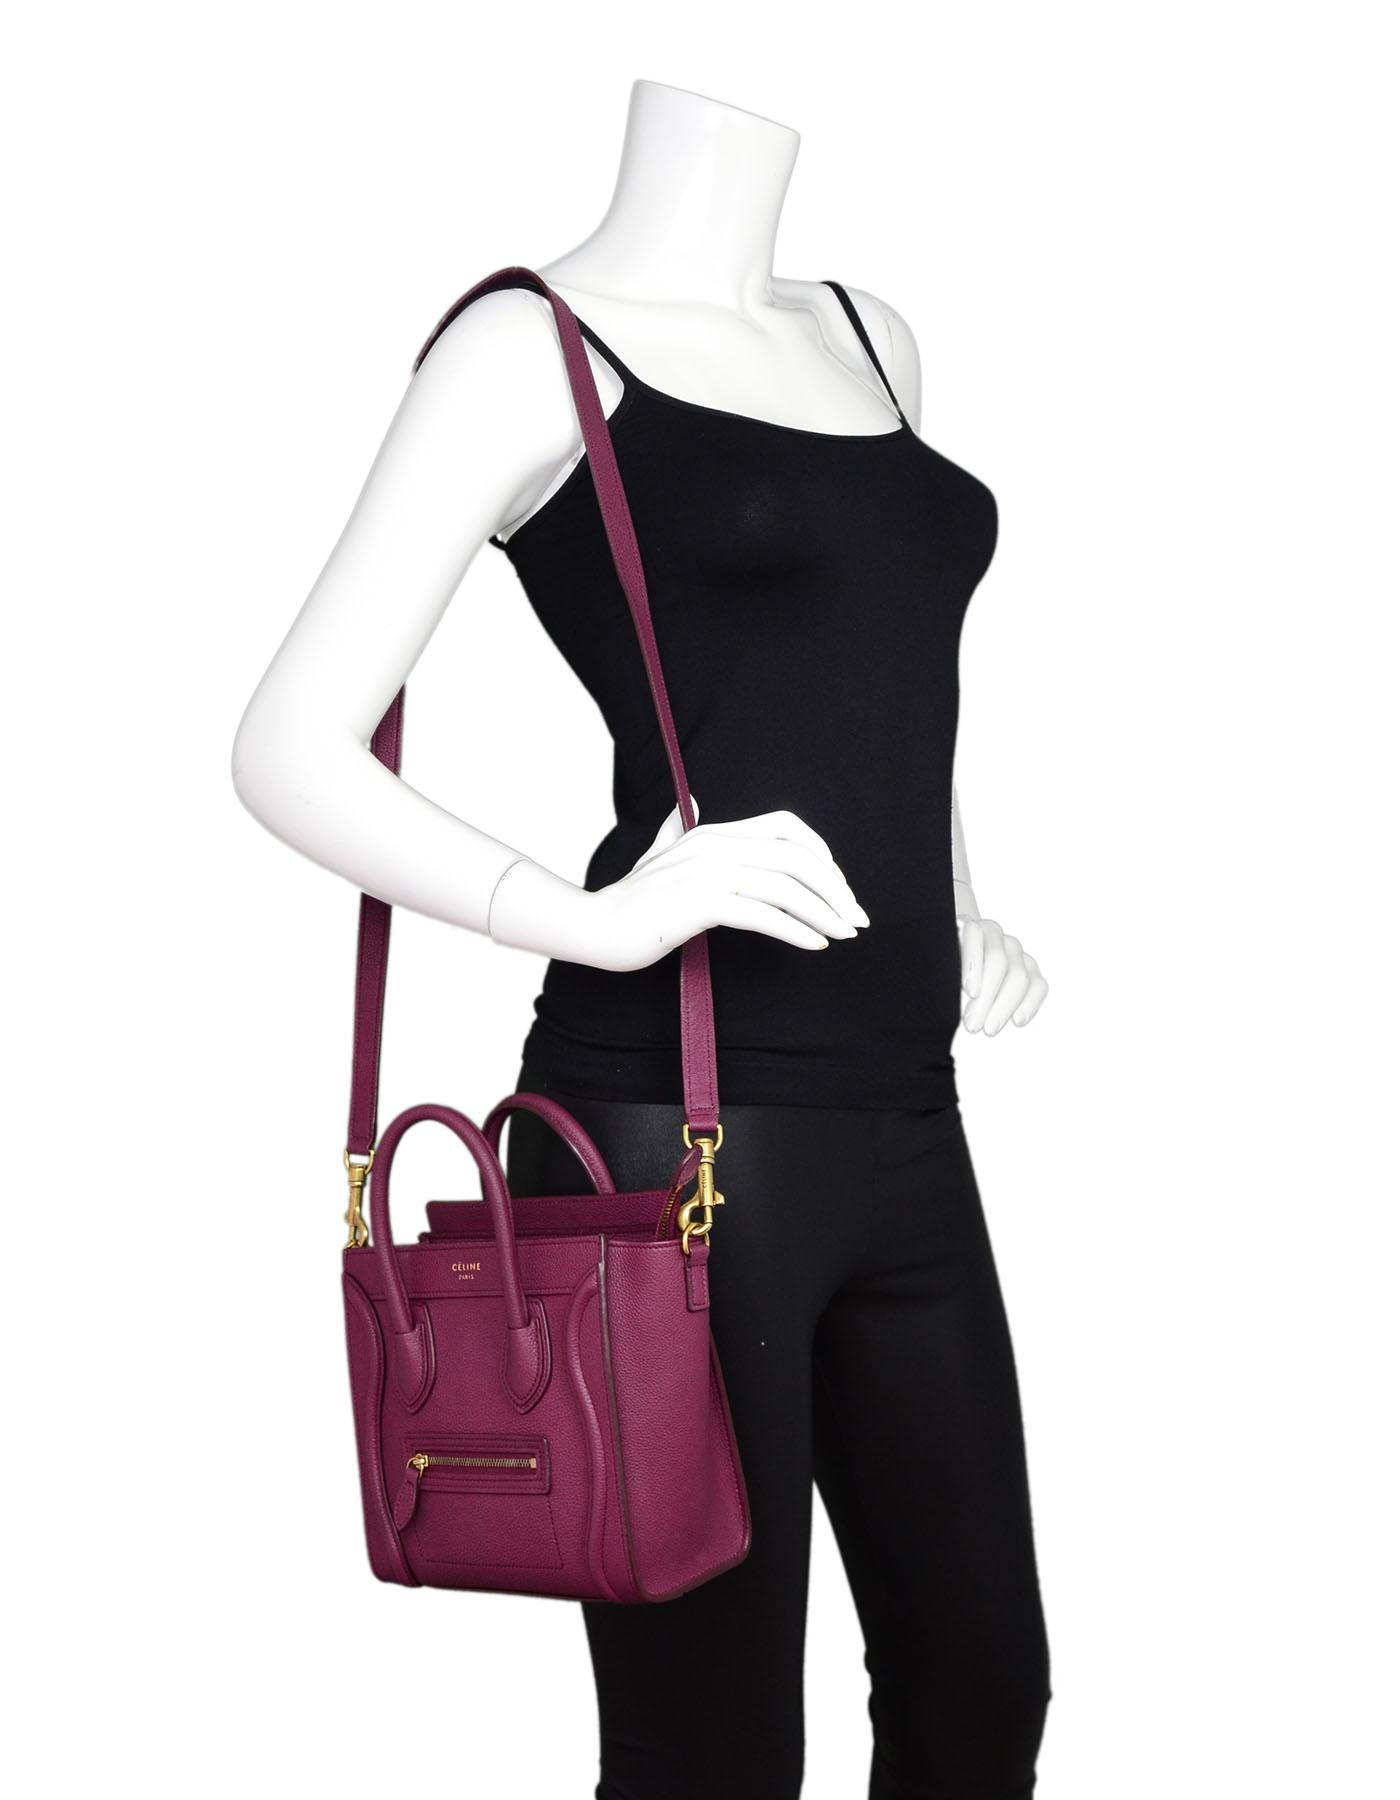 Celine Raspberry Drummed Calfskin Nano Luggage Tote

    Made In: Italy
    Color: Raspberry
    Hardware: Goldtone
    Materials: Leather, metal
    Lining: Raspberry suede
    Closure/Opening: Zip top closure
    Exterior Pockets: Front zip